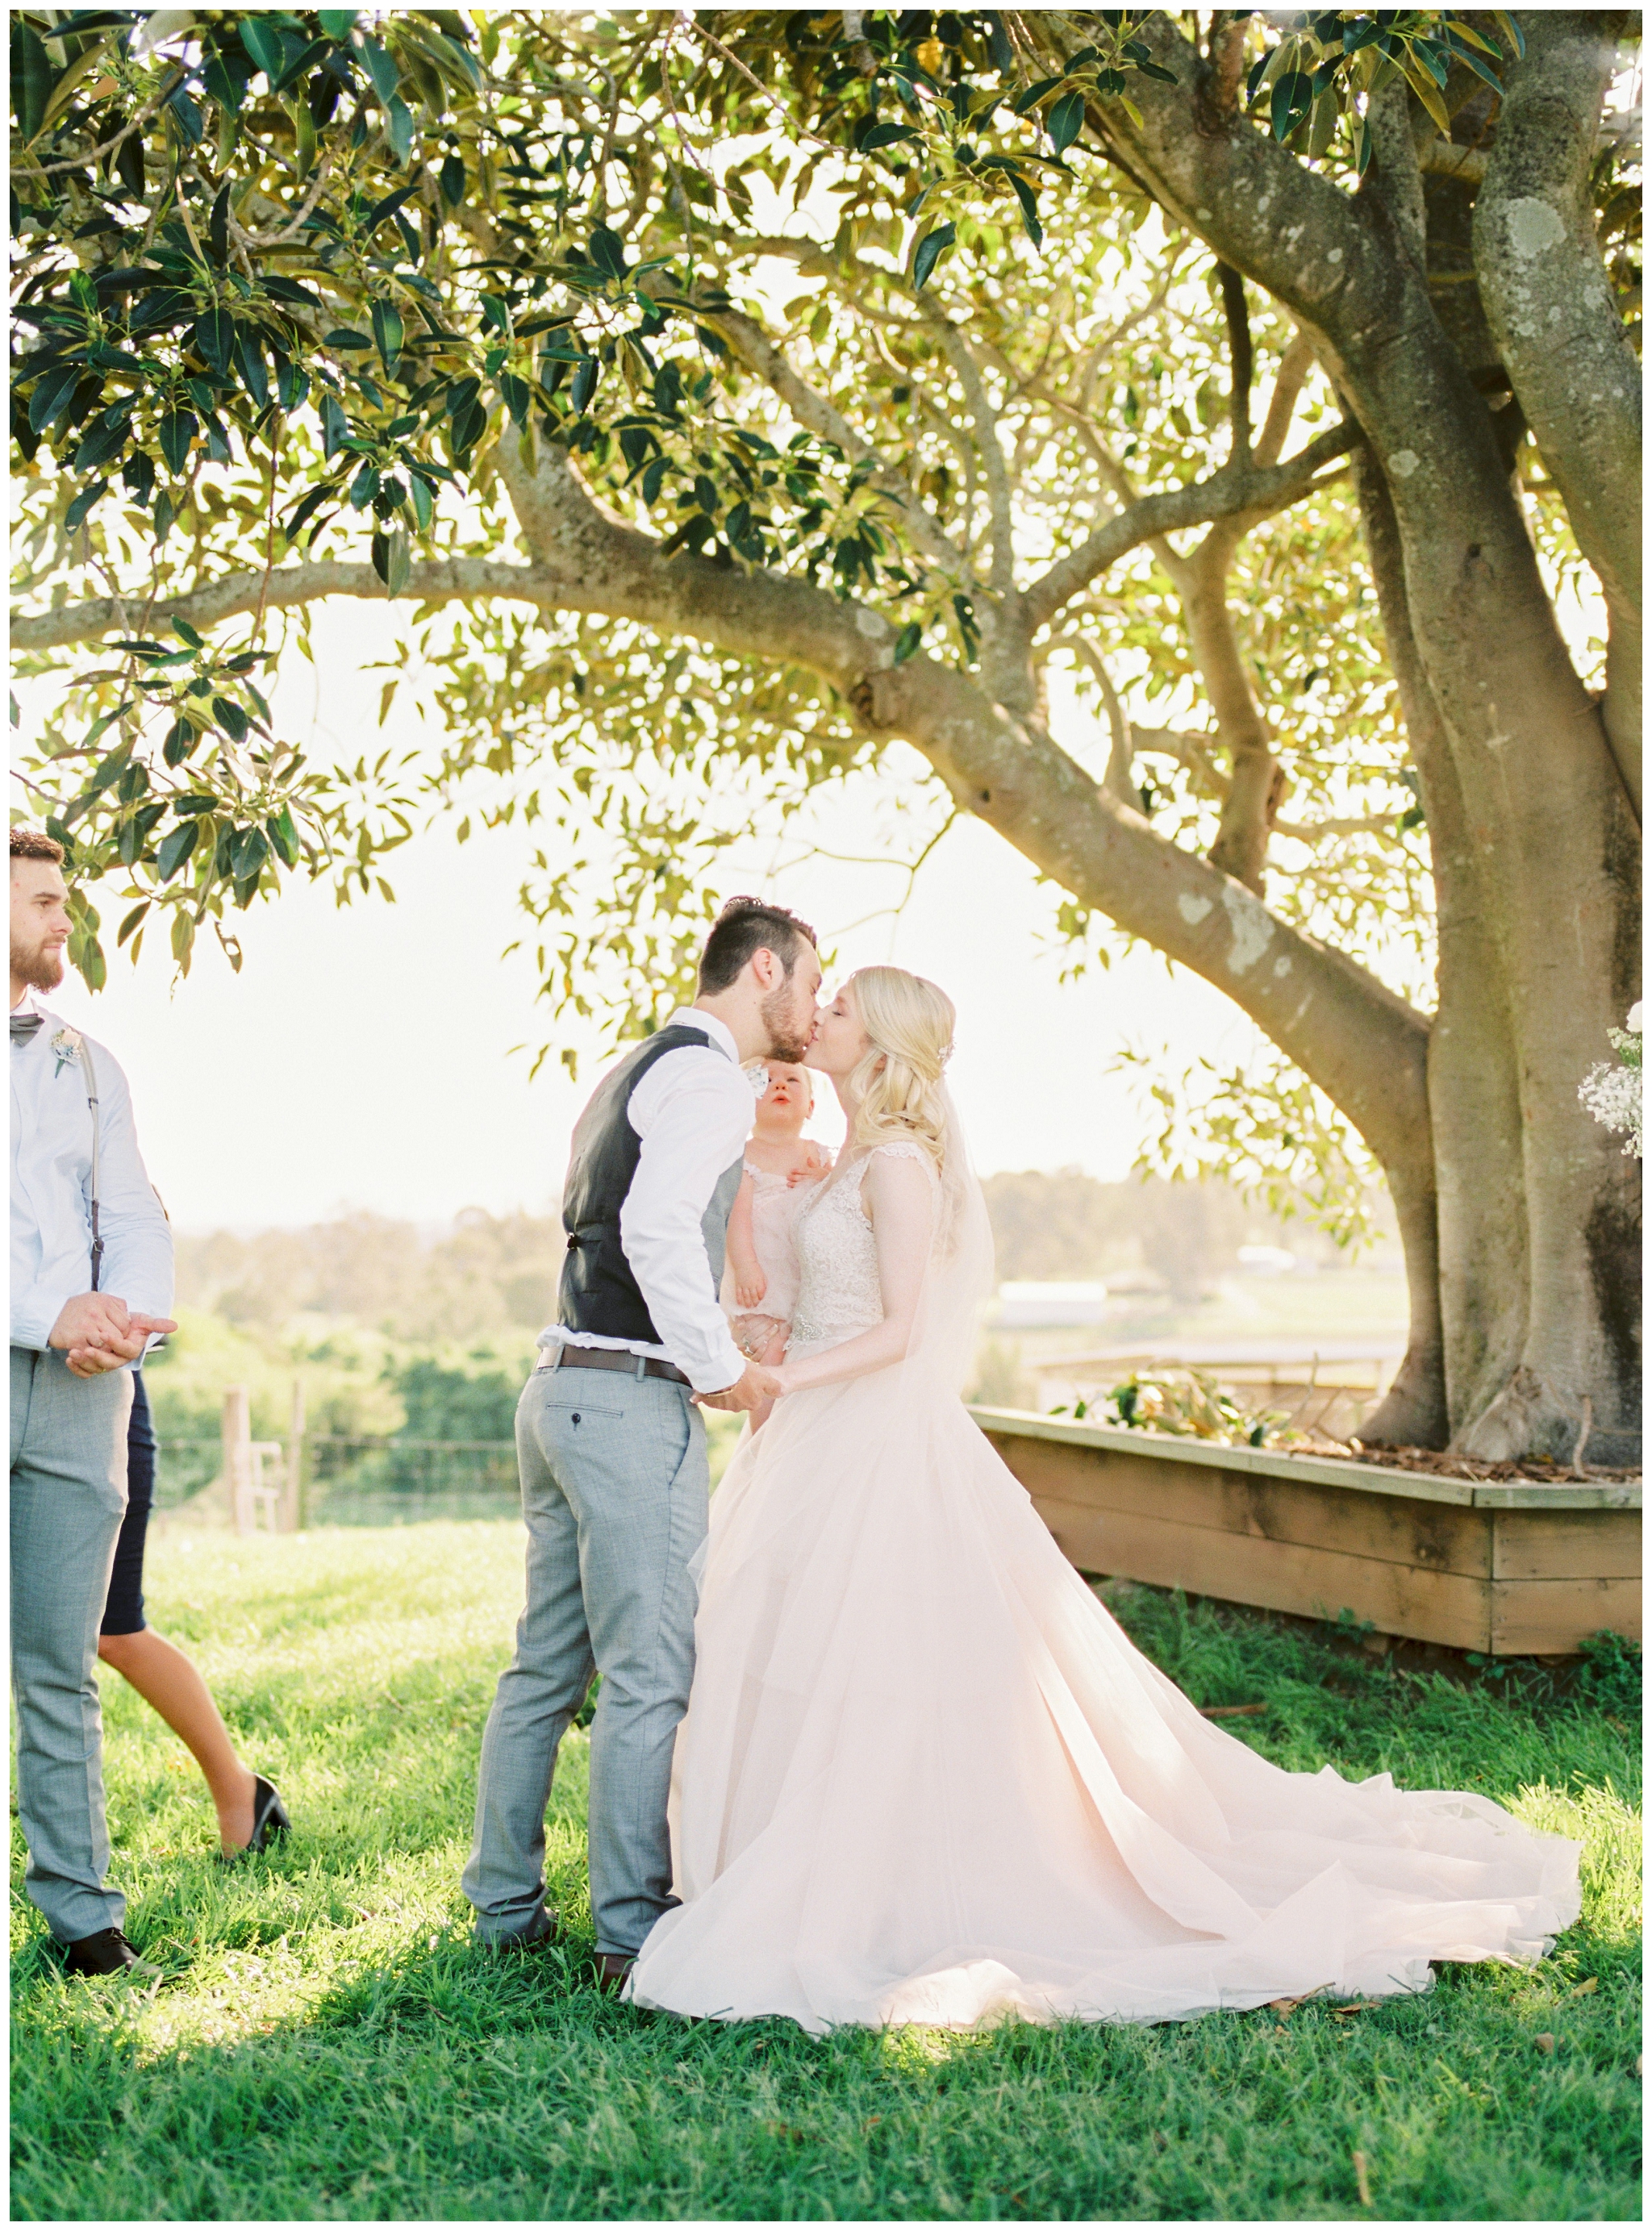 Tegan and Alex Wedding at Albert River Wines by Casey Jane Photography 39